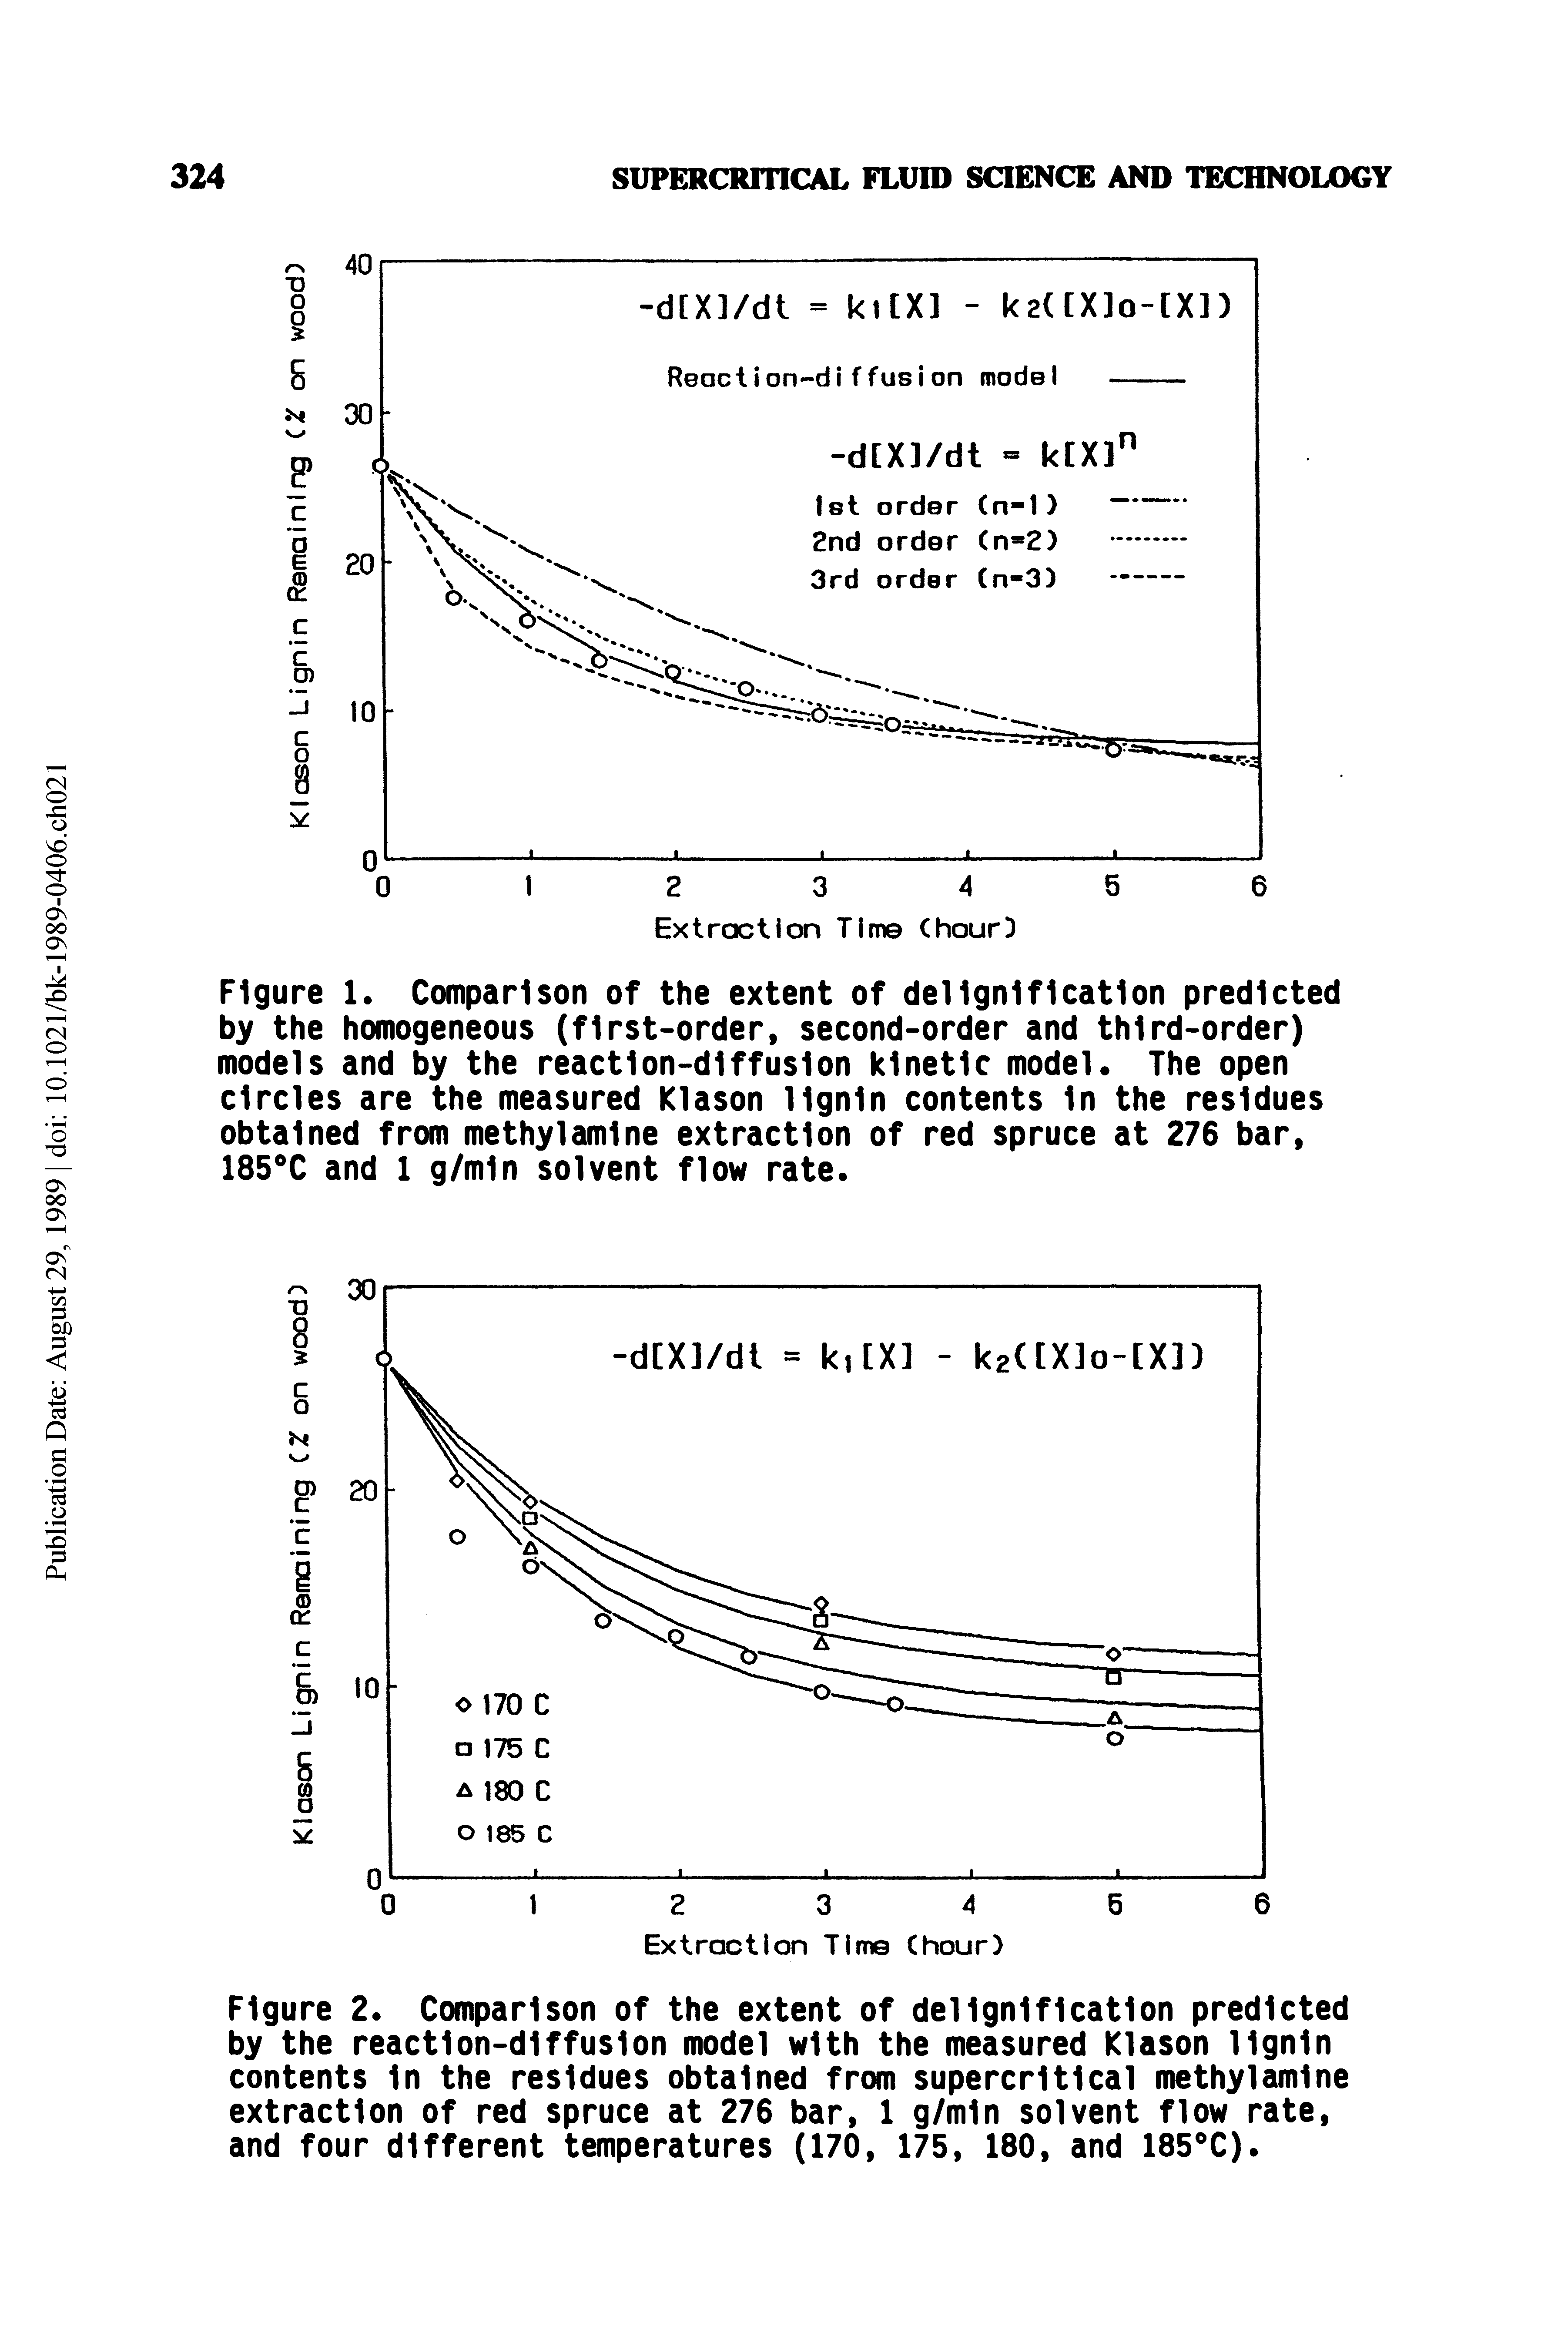 Figure 2. Comparison of the extent of delignificatlon predicted by the reaction-diffusion model with the measured Klason lignin contents In the residues obtained from supercritical methylamlne extraction of red spruce at 276 bar, 1 g/mln solvent flow rate, and four different temperatures (170, 175, 180, and 185 C).